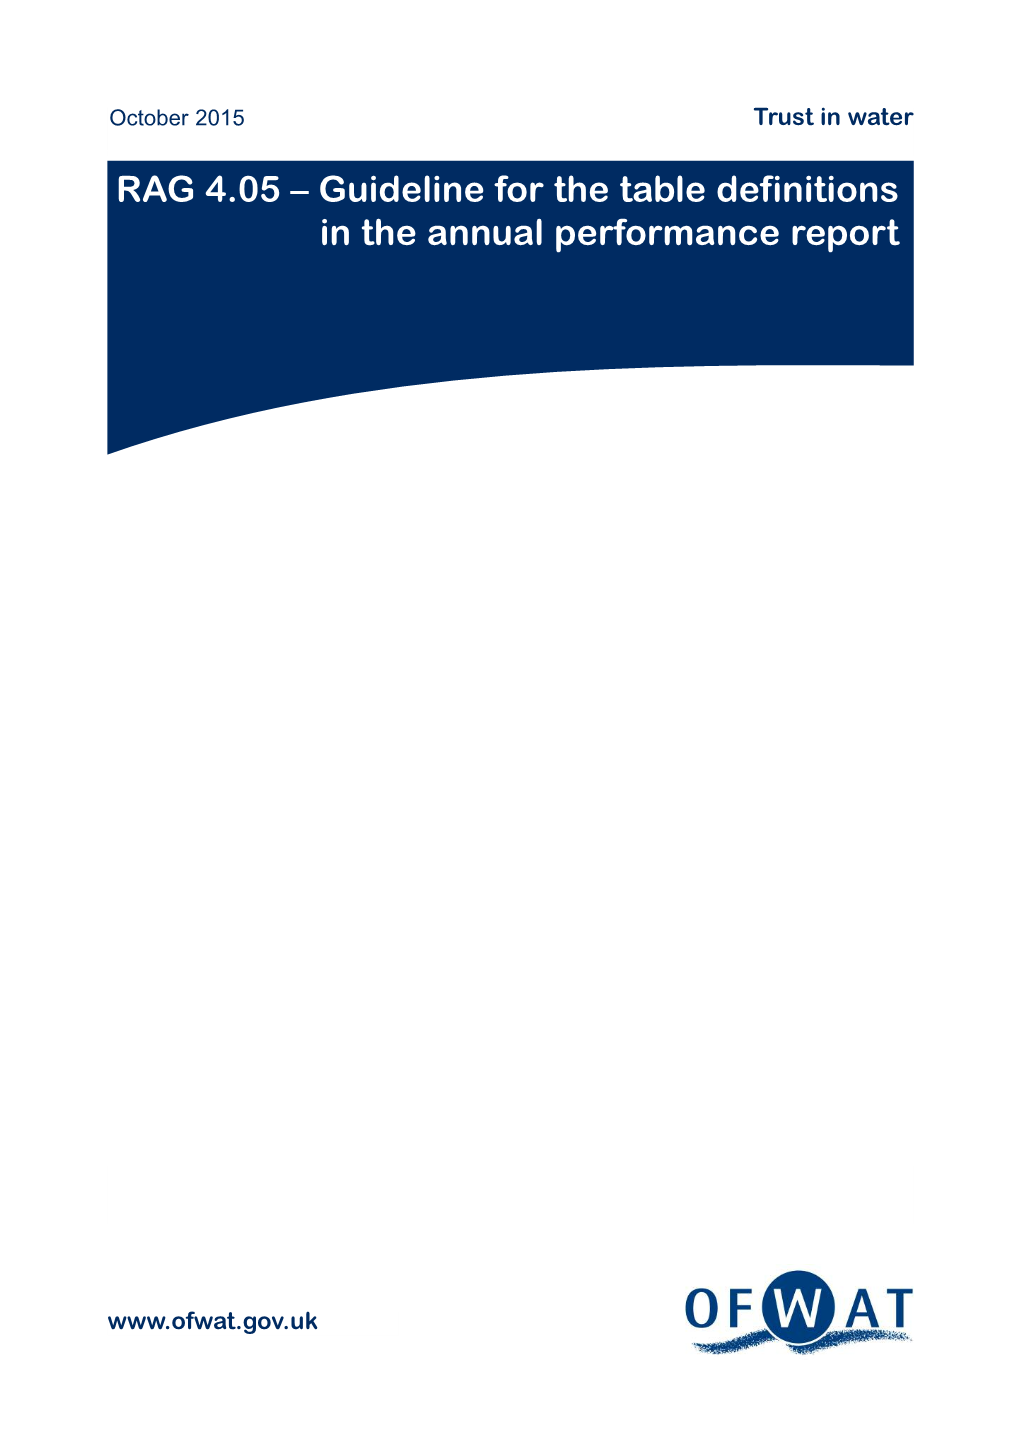 RAG 4.05 – Guideline for the Table Definitions in the Annual Performance Report